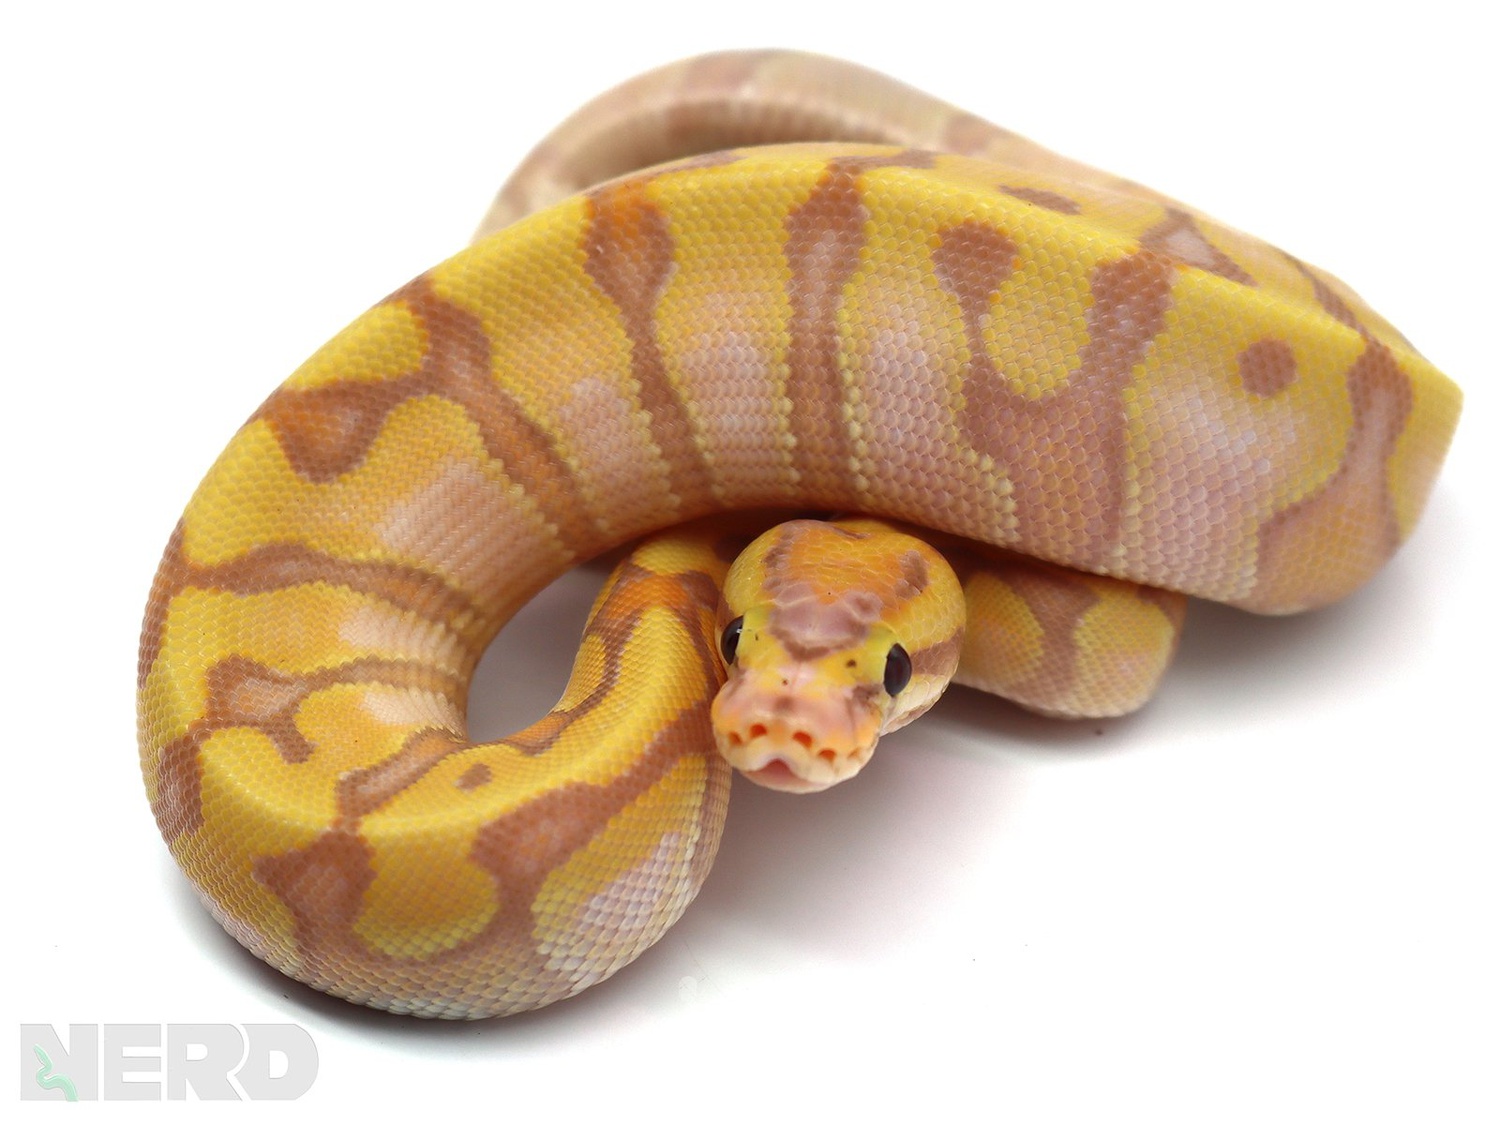 Coral Glow Pastel Hidden Gene Woma Granite Enchi Fader Odium Possible Het Piebald Ball Python by New England Reptile Distributors